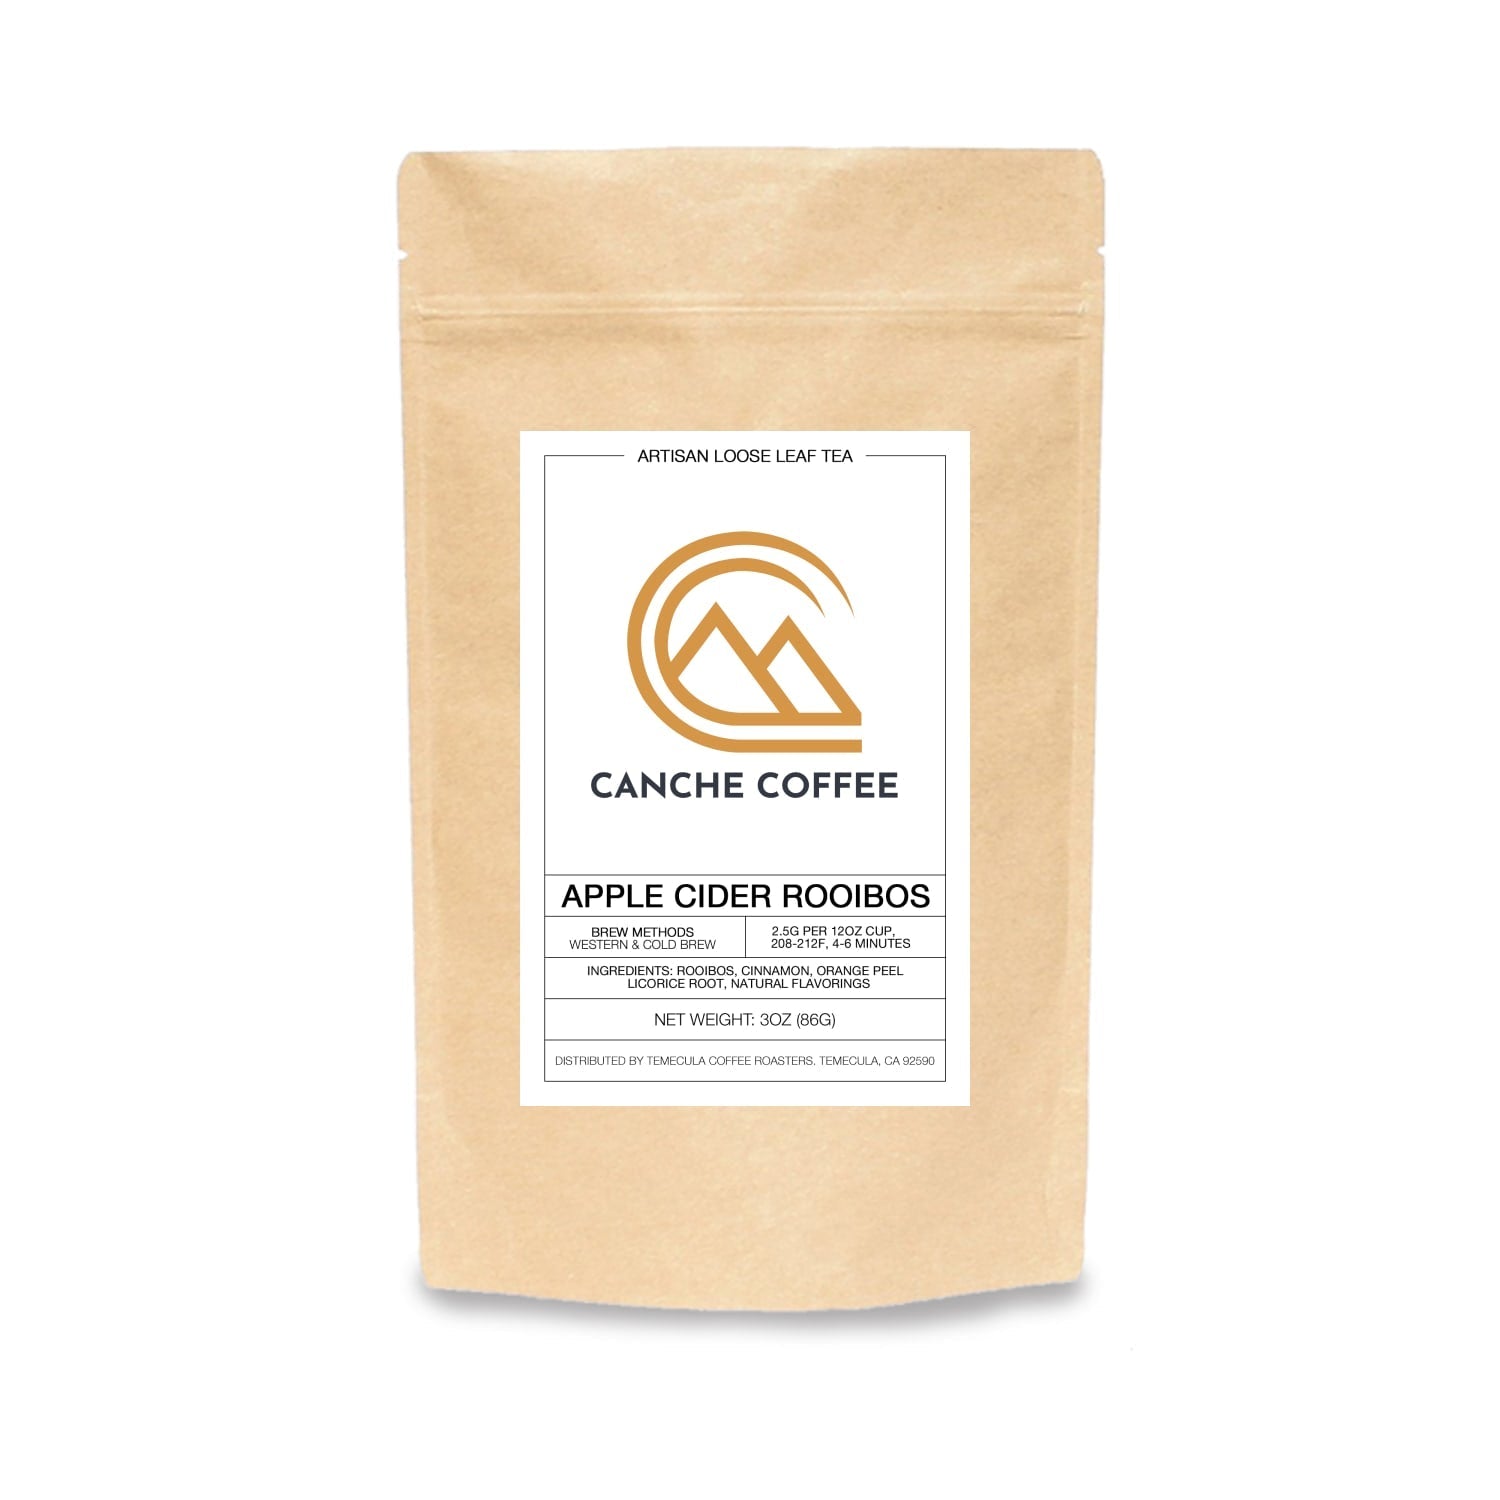 Apple Cider Rooibos - Canche Coffee